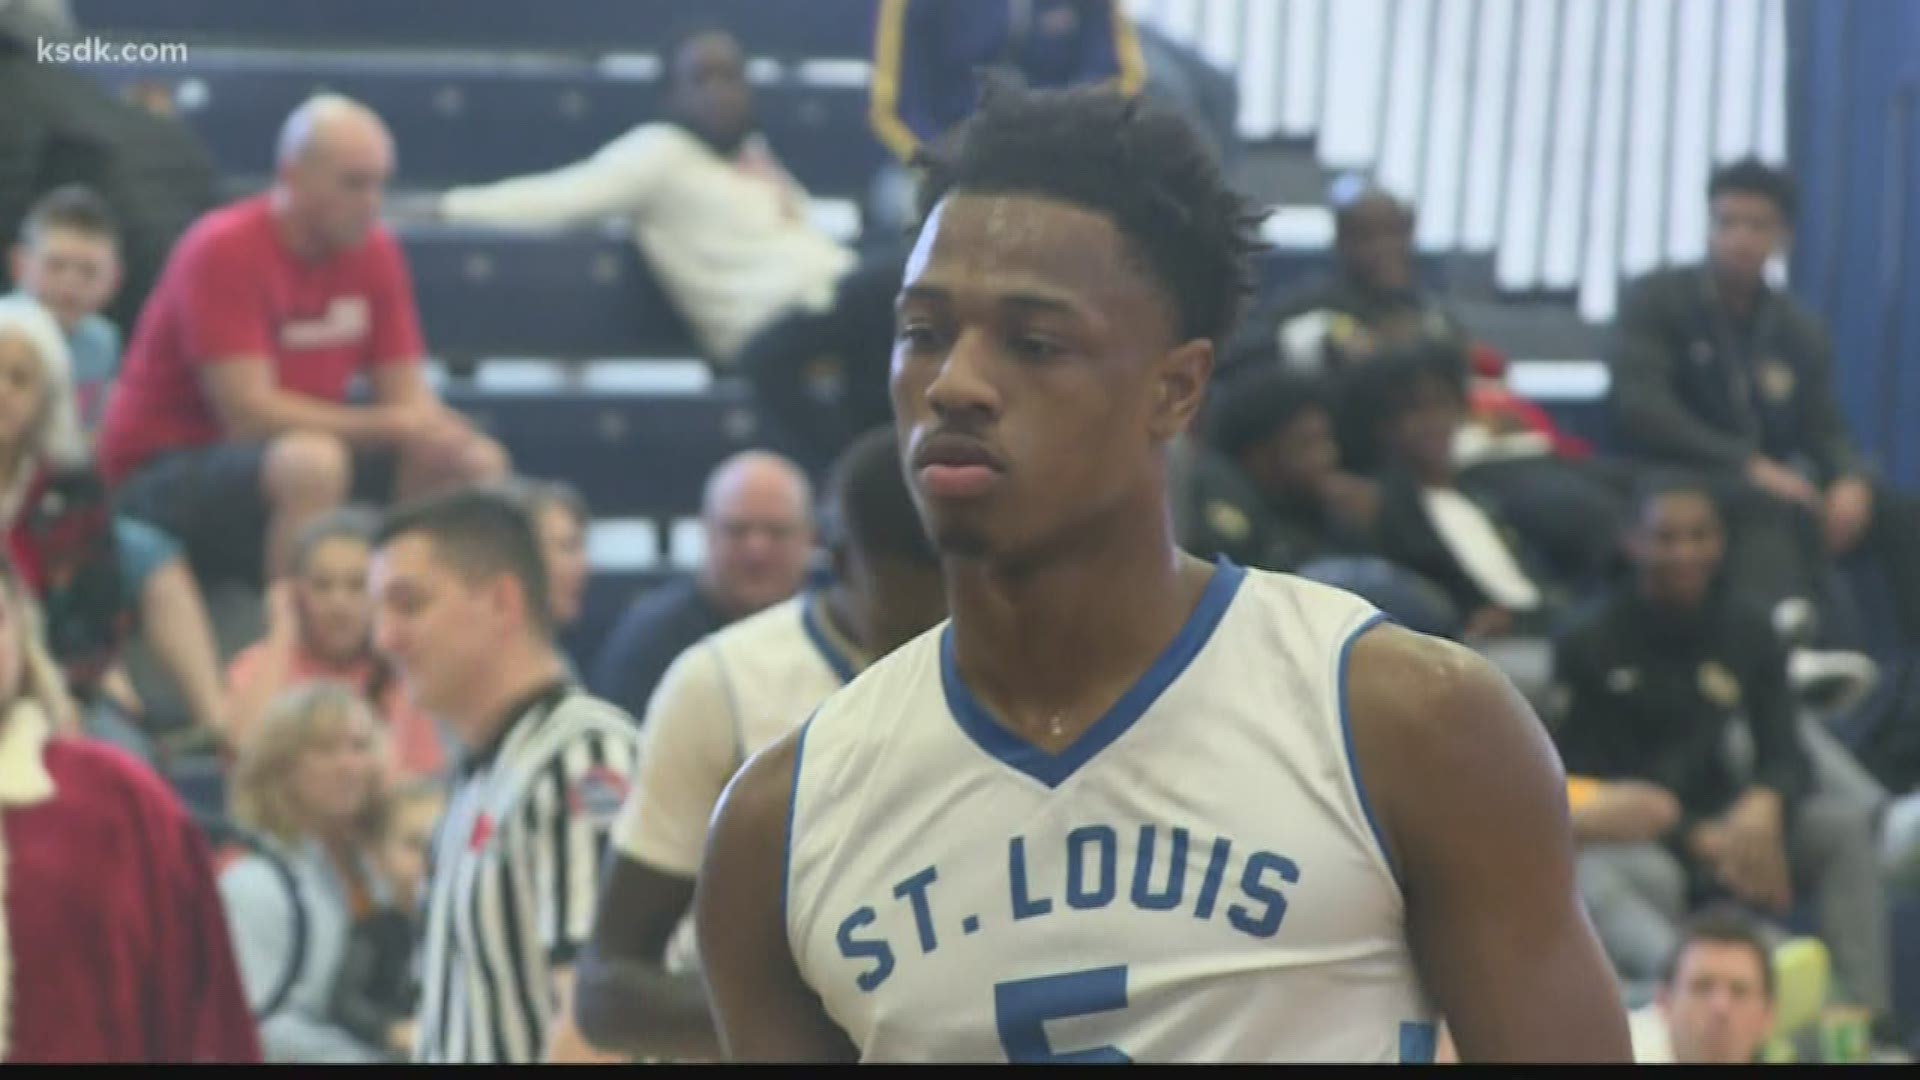 St. Louis Christian and their star Jordan Nesbitt were able to escape with the victory.